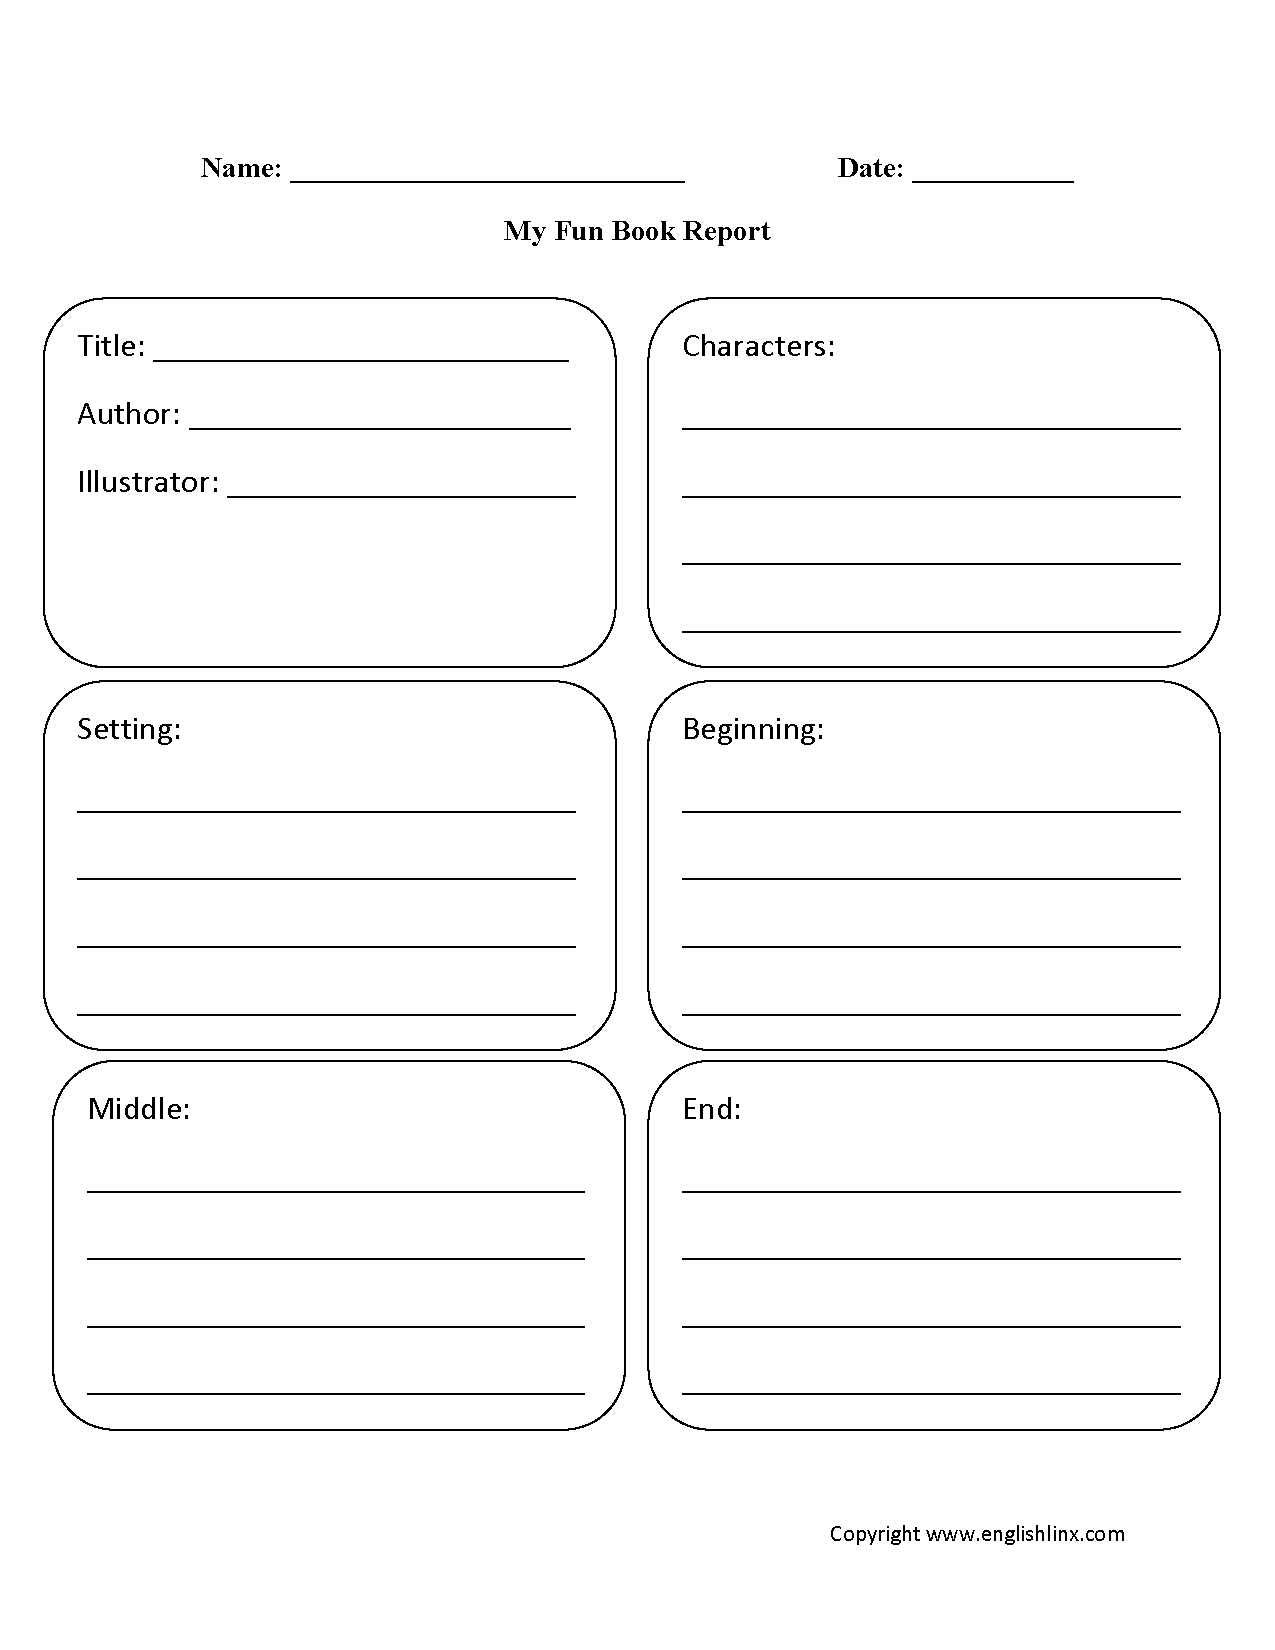 Englishlinx | Book Report Worksheets - Free Printable Book Report Forms